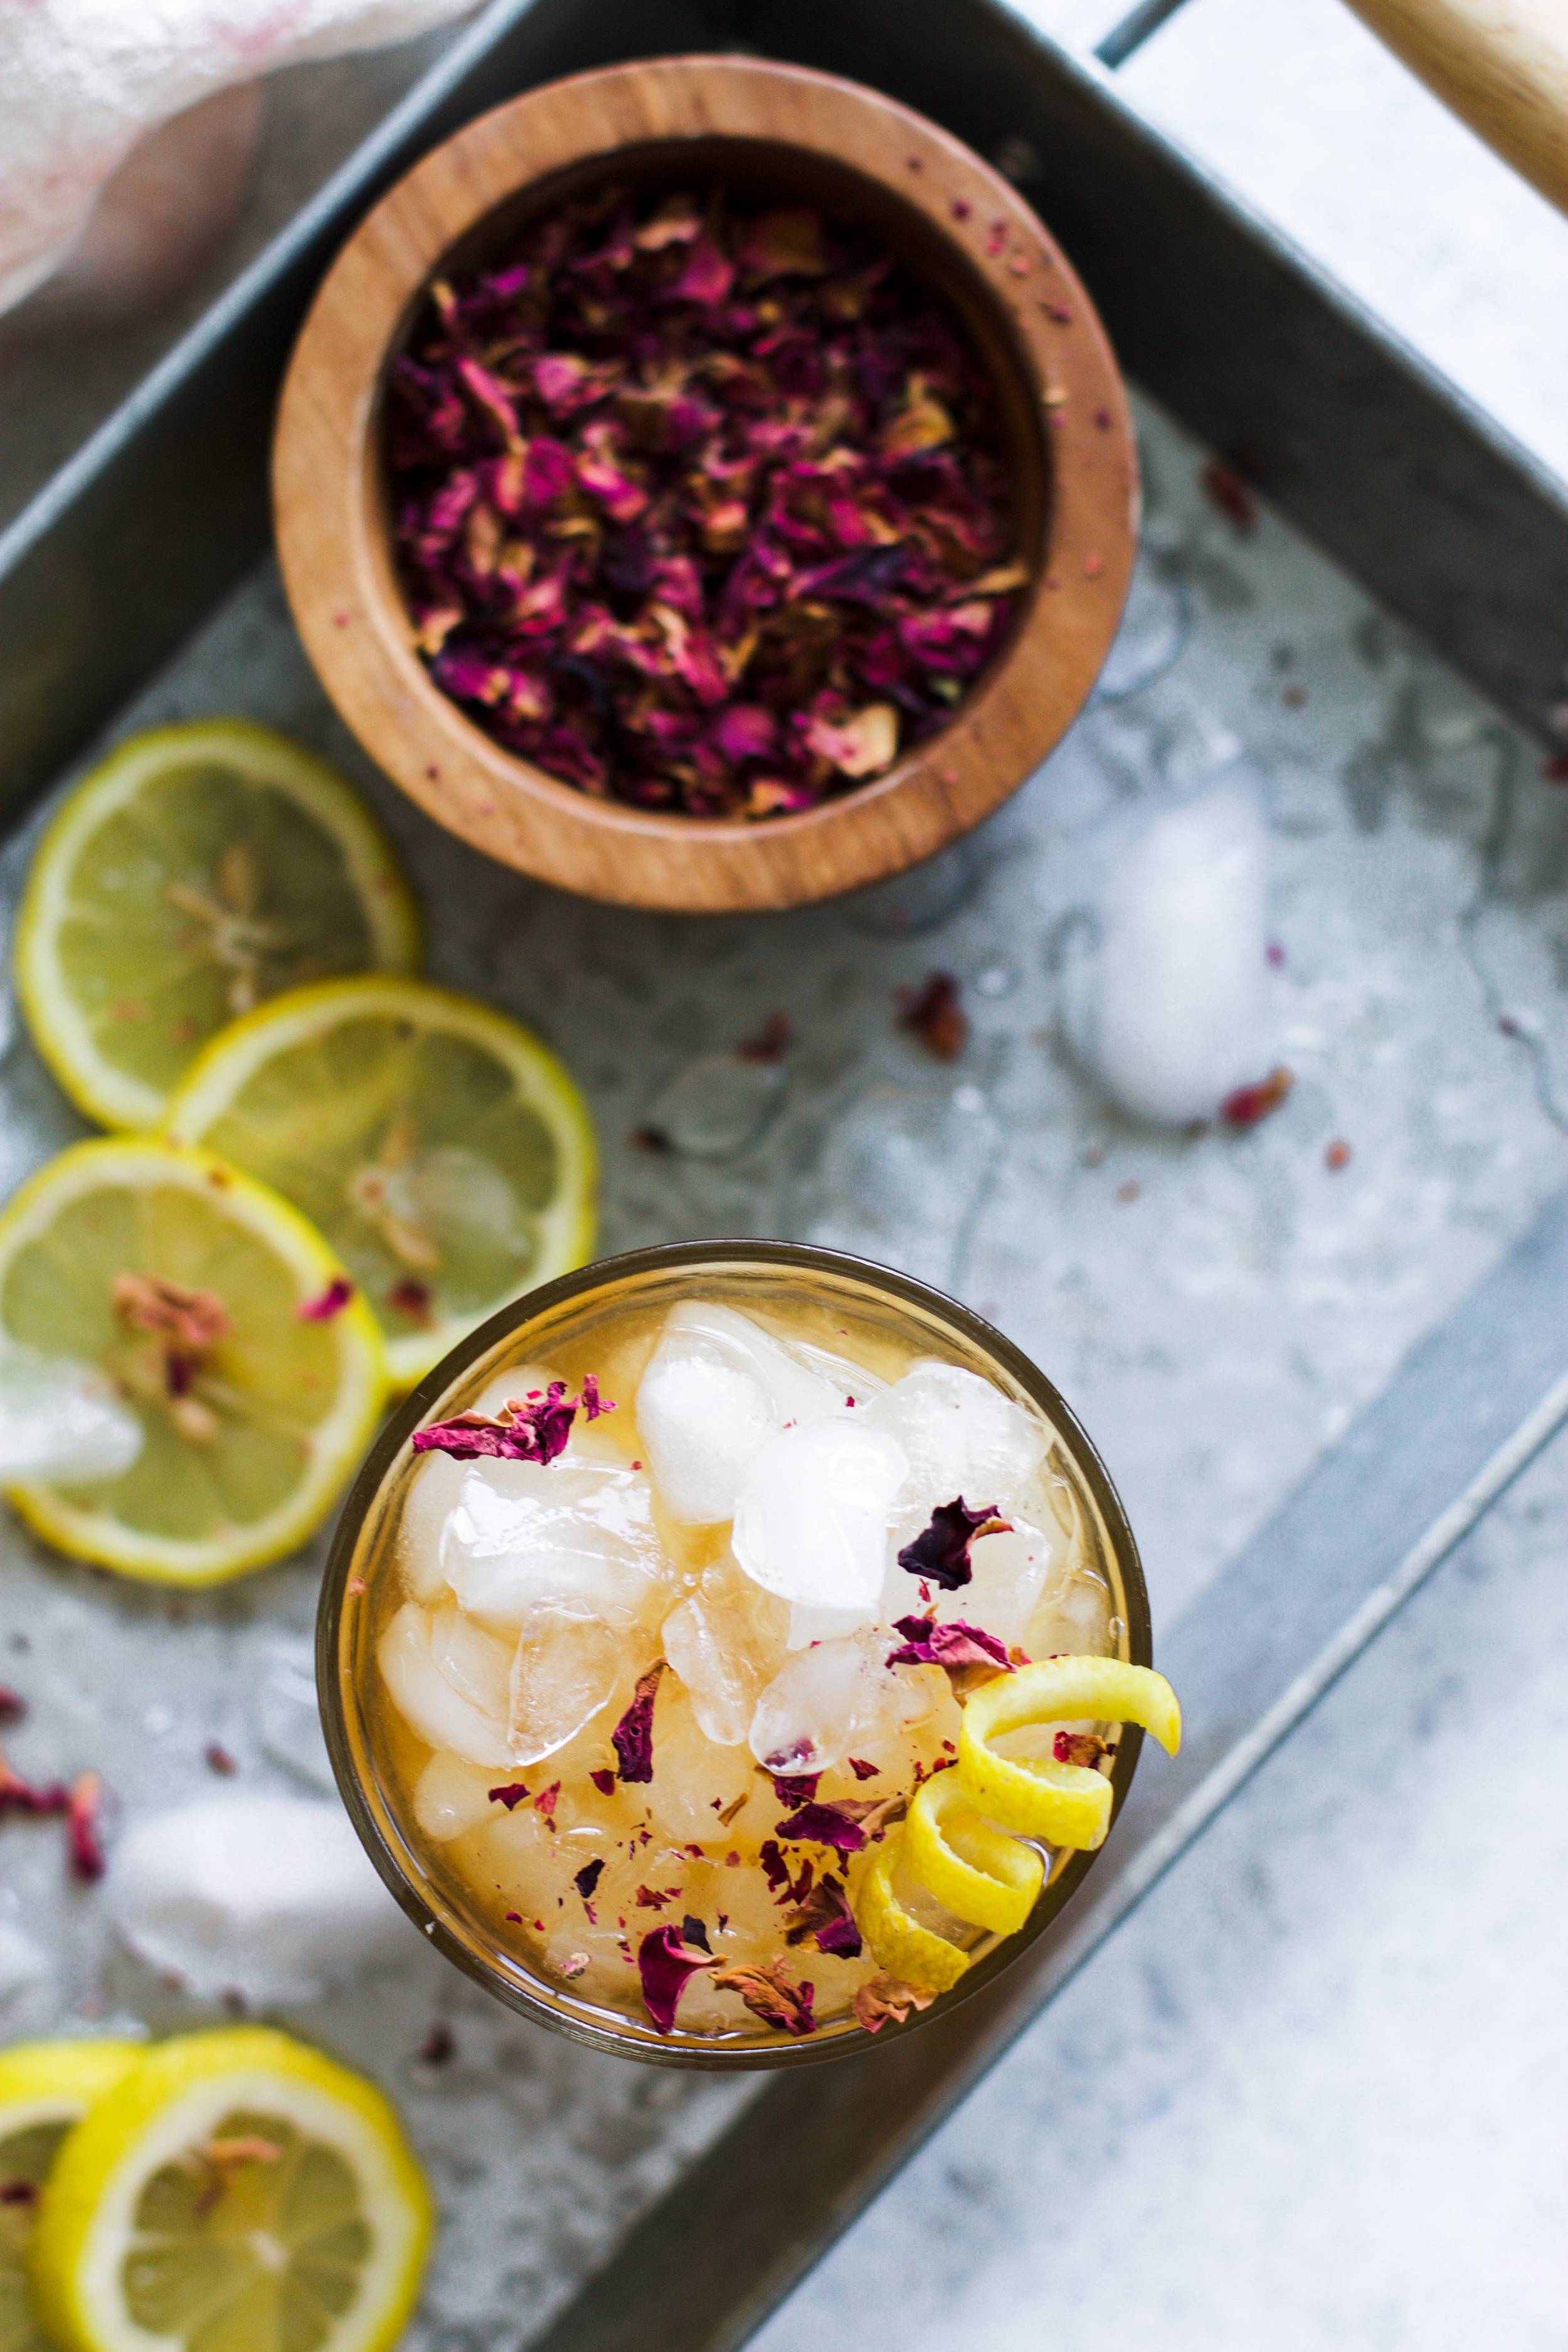 Rose Iced Tea - Oh, How Civilized